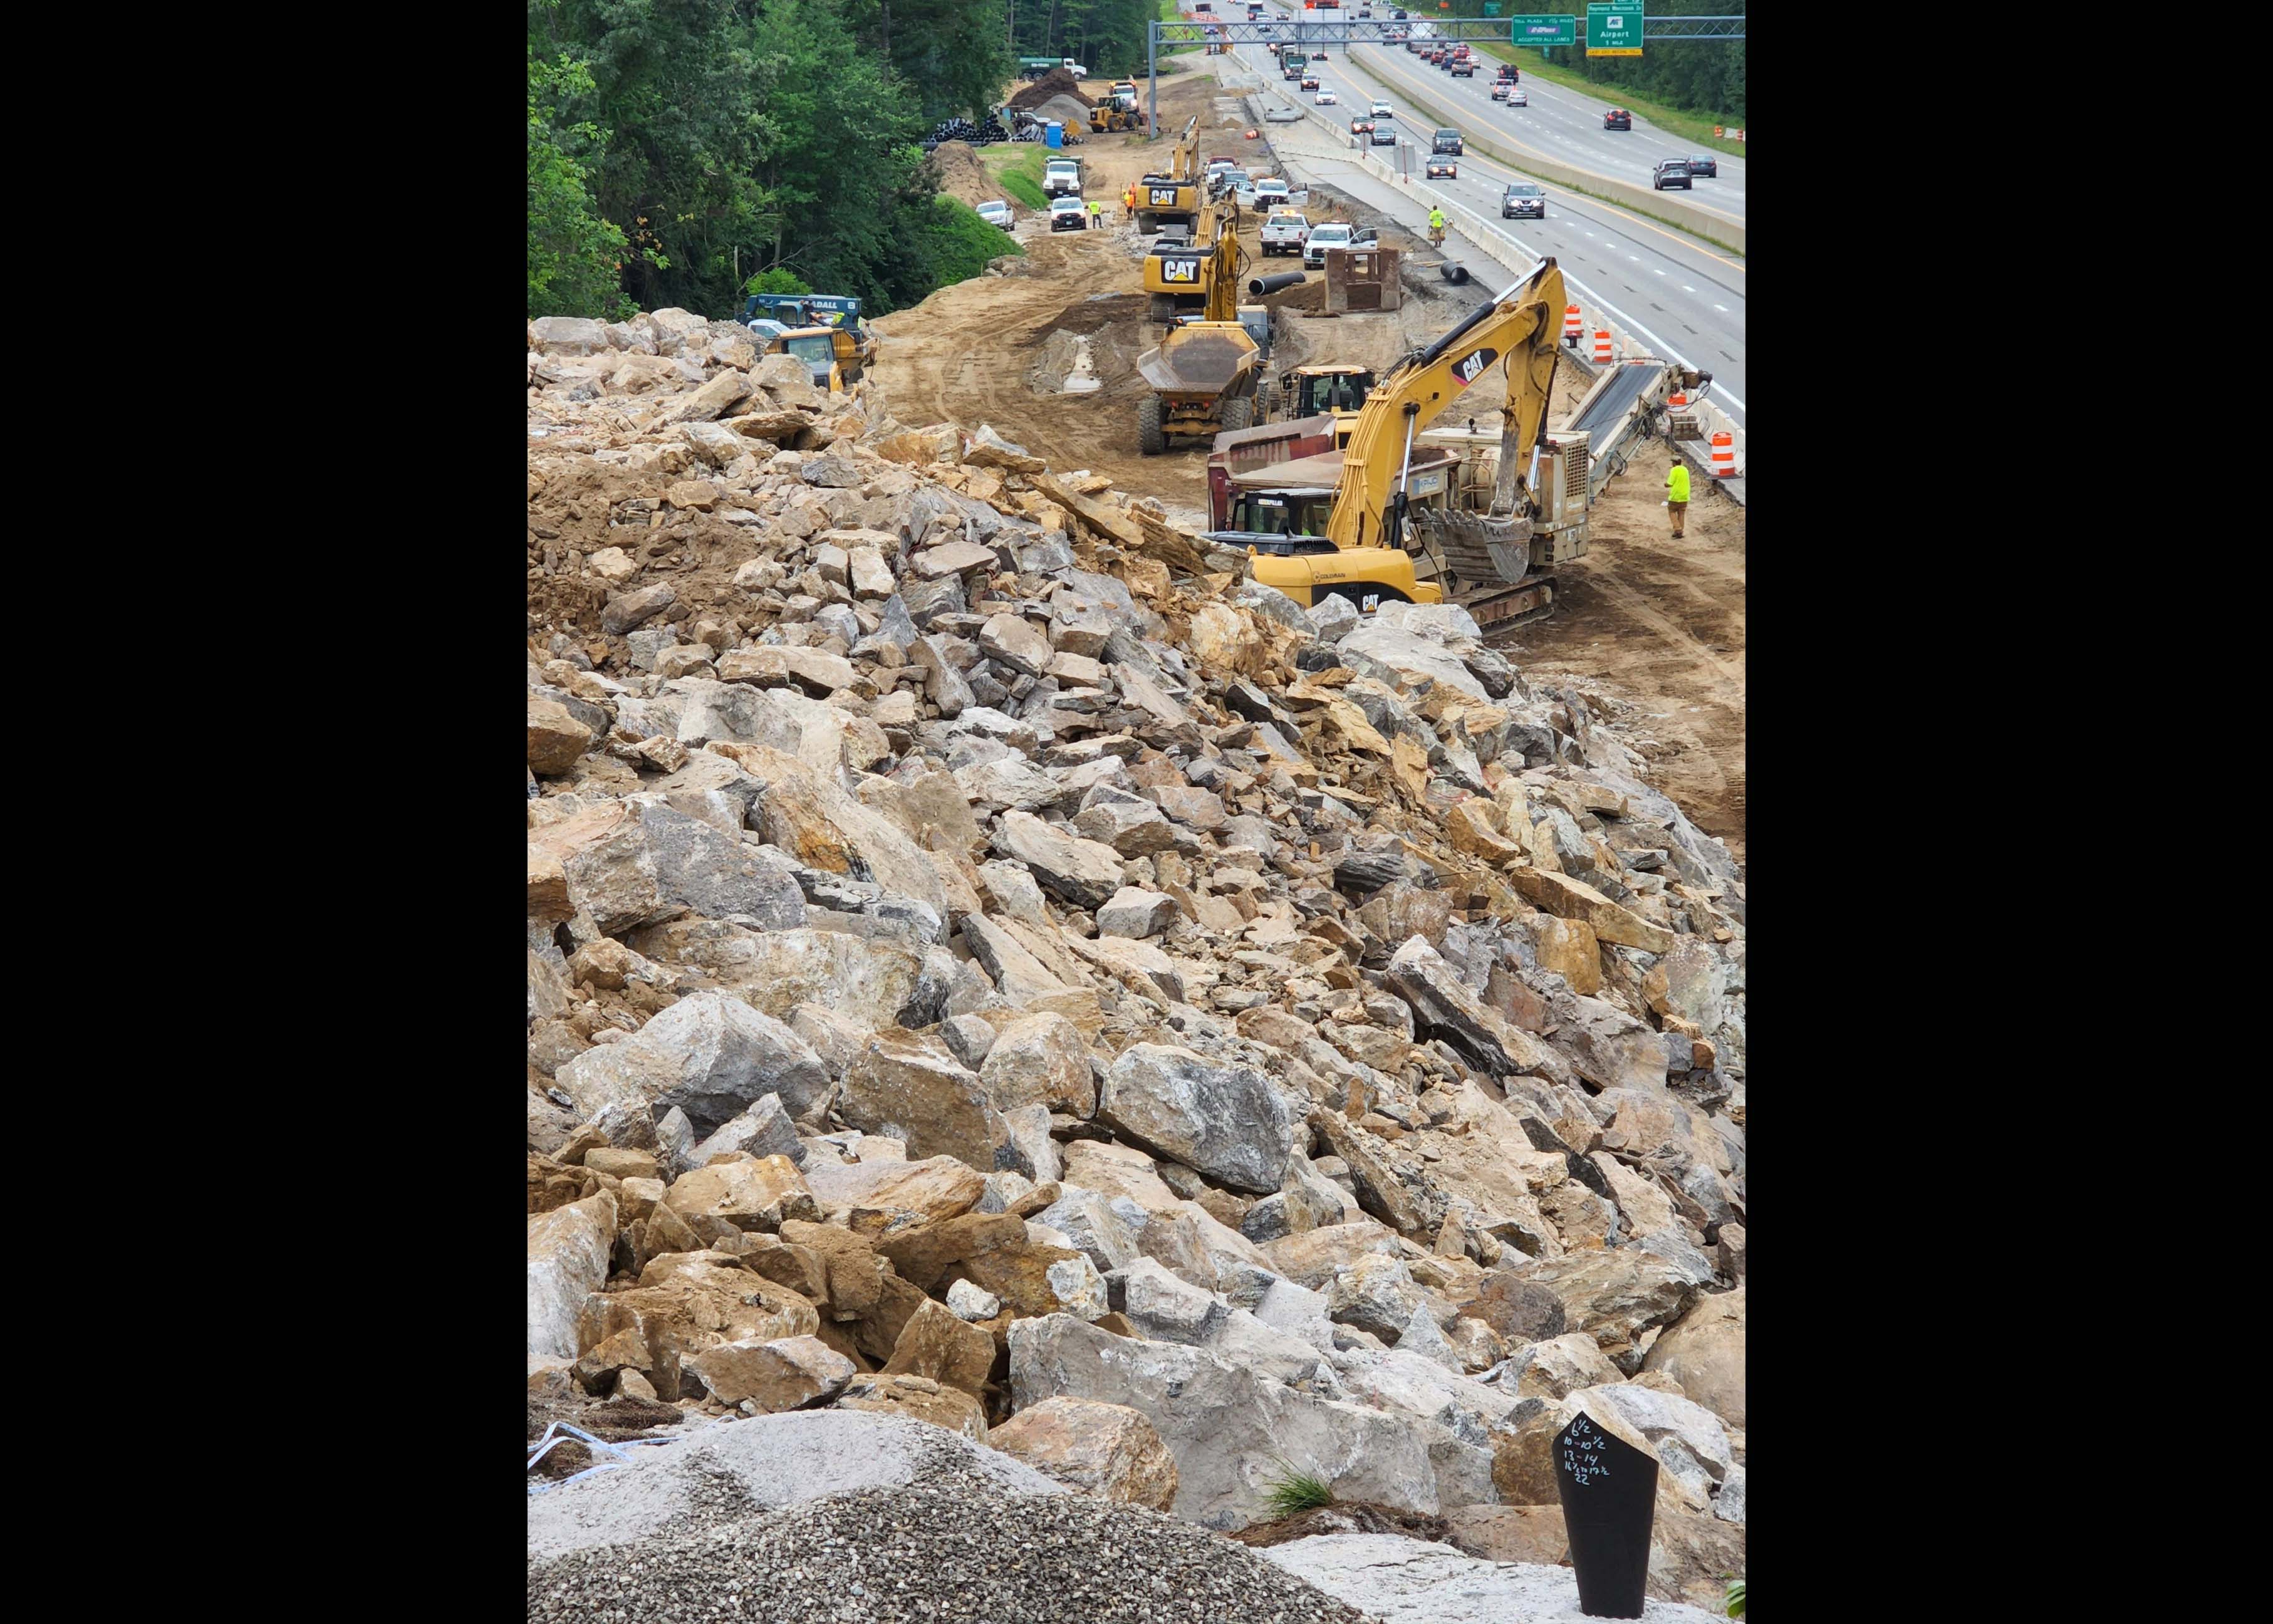 Rock crushing to select materials - August 2022